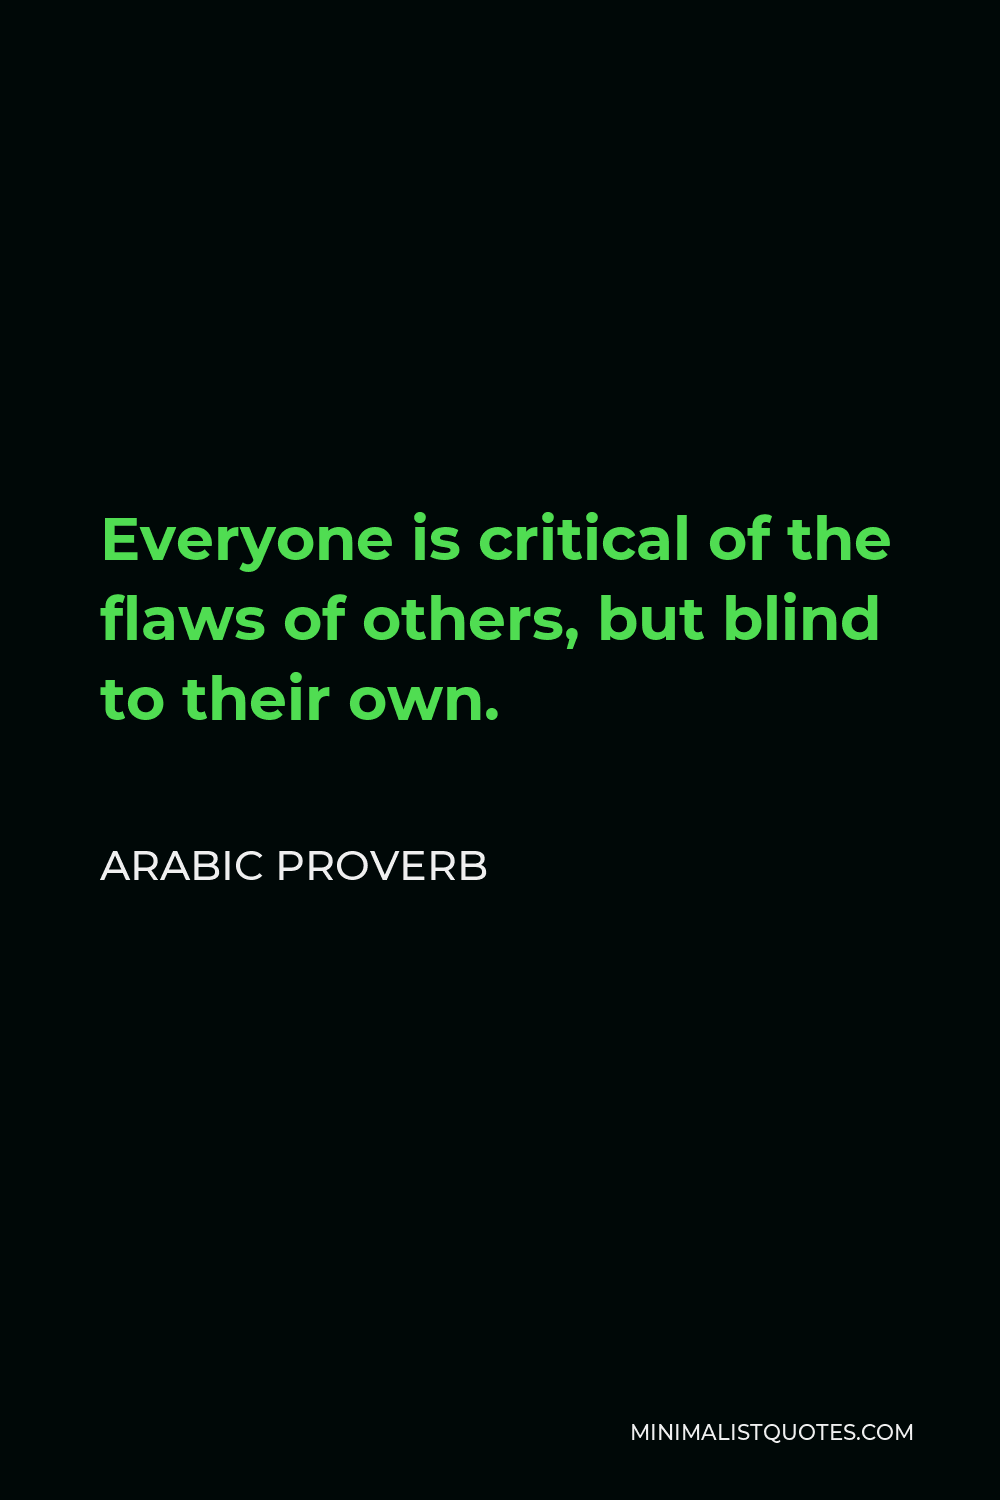 Arabic Proverb Quote - Everyone is critical of the flaws of others, but blind to their own.